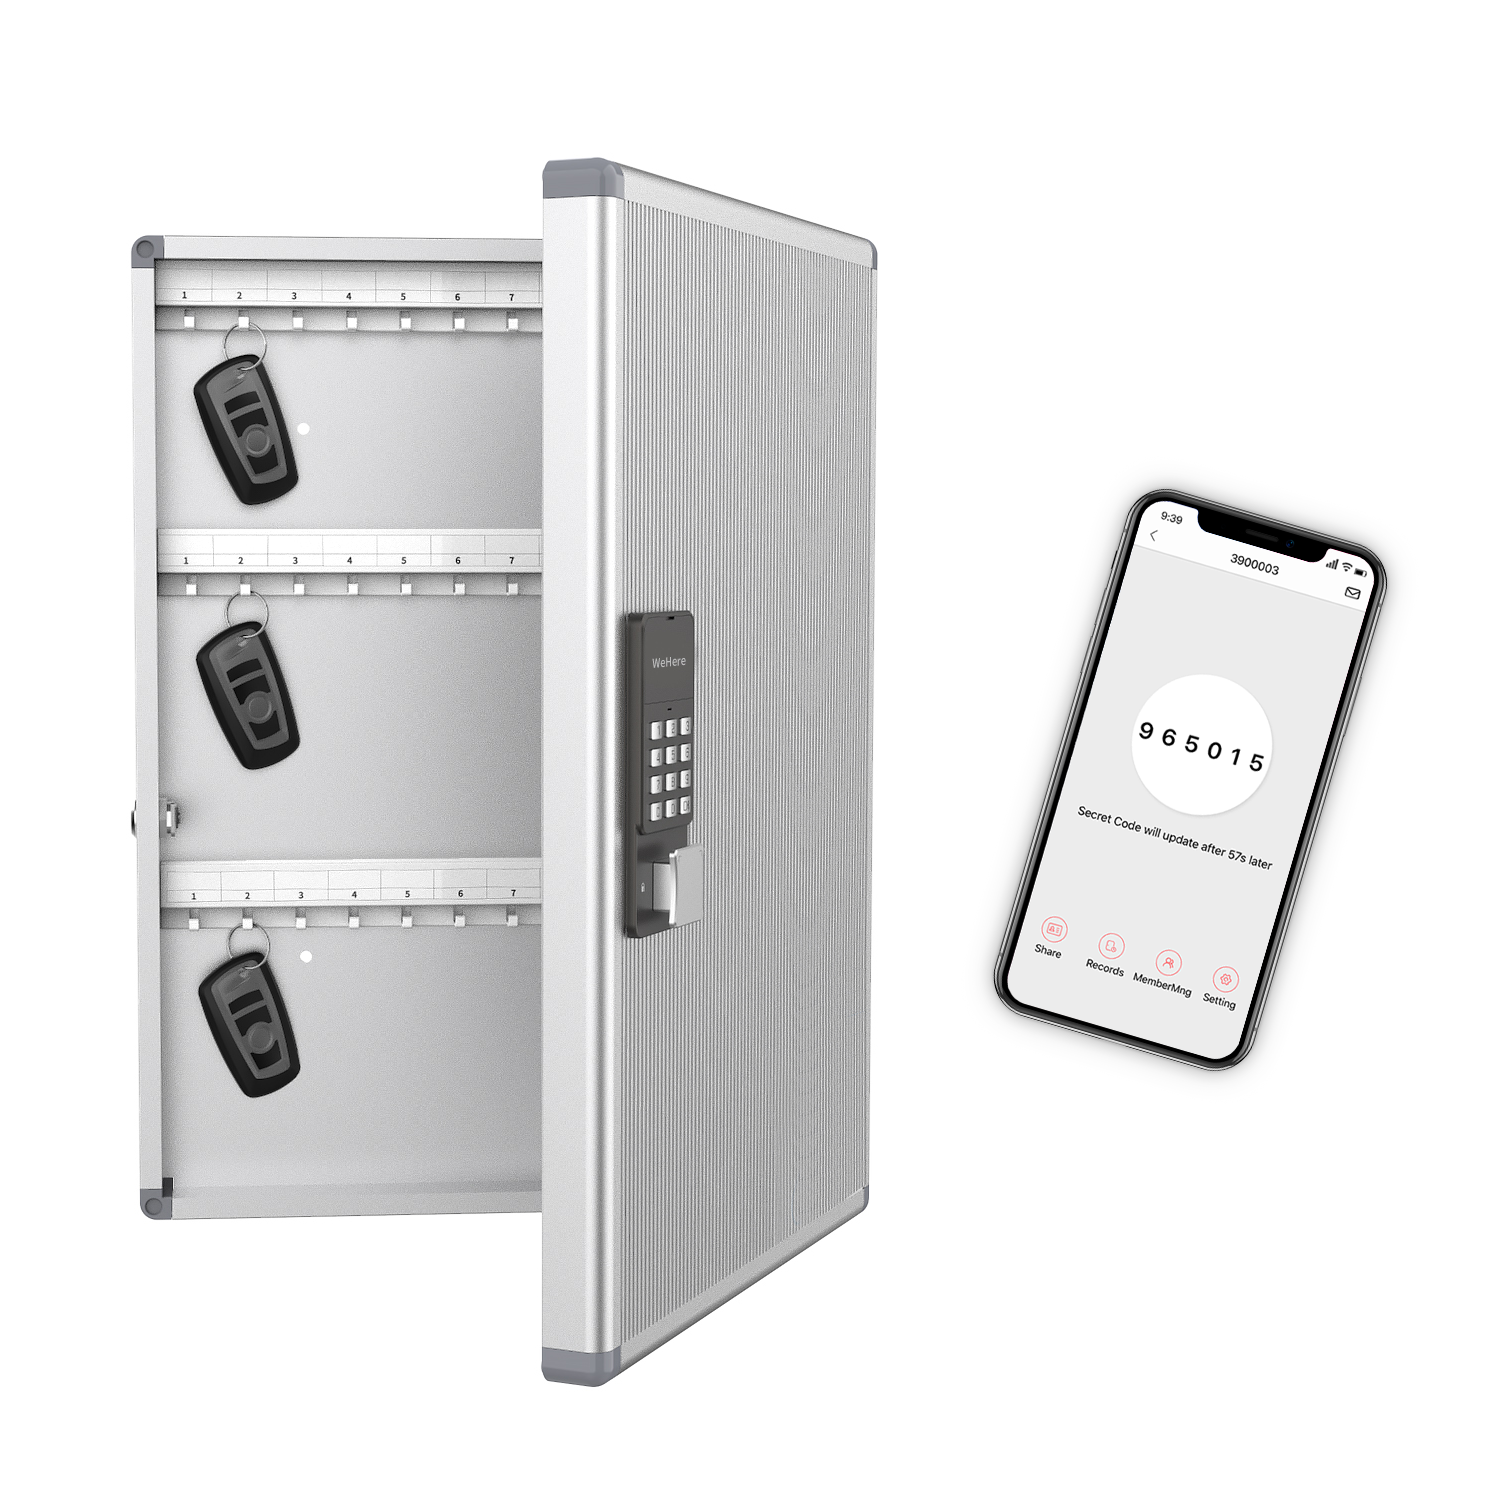 WeHere Smart Key Lock Box with APP;  Key Cabinet Wall Mount use Blutooth;  OTP;  Fixed Code Unlock;  App Generates Codes without Internet; Remote Authorization Great for Office;  School;  Realtors